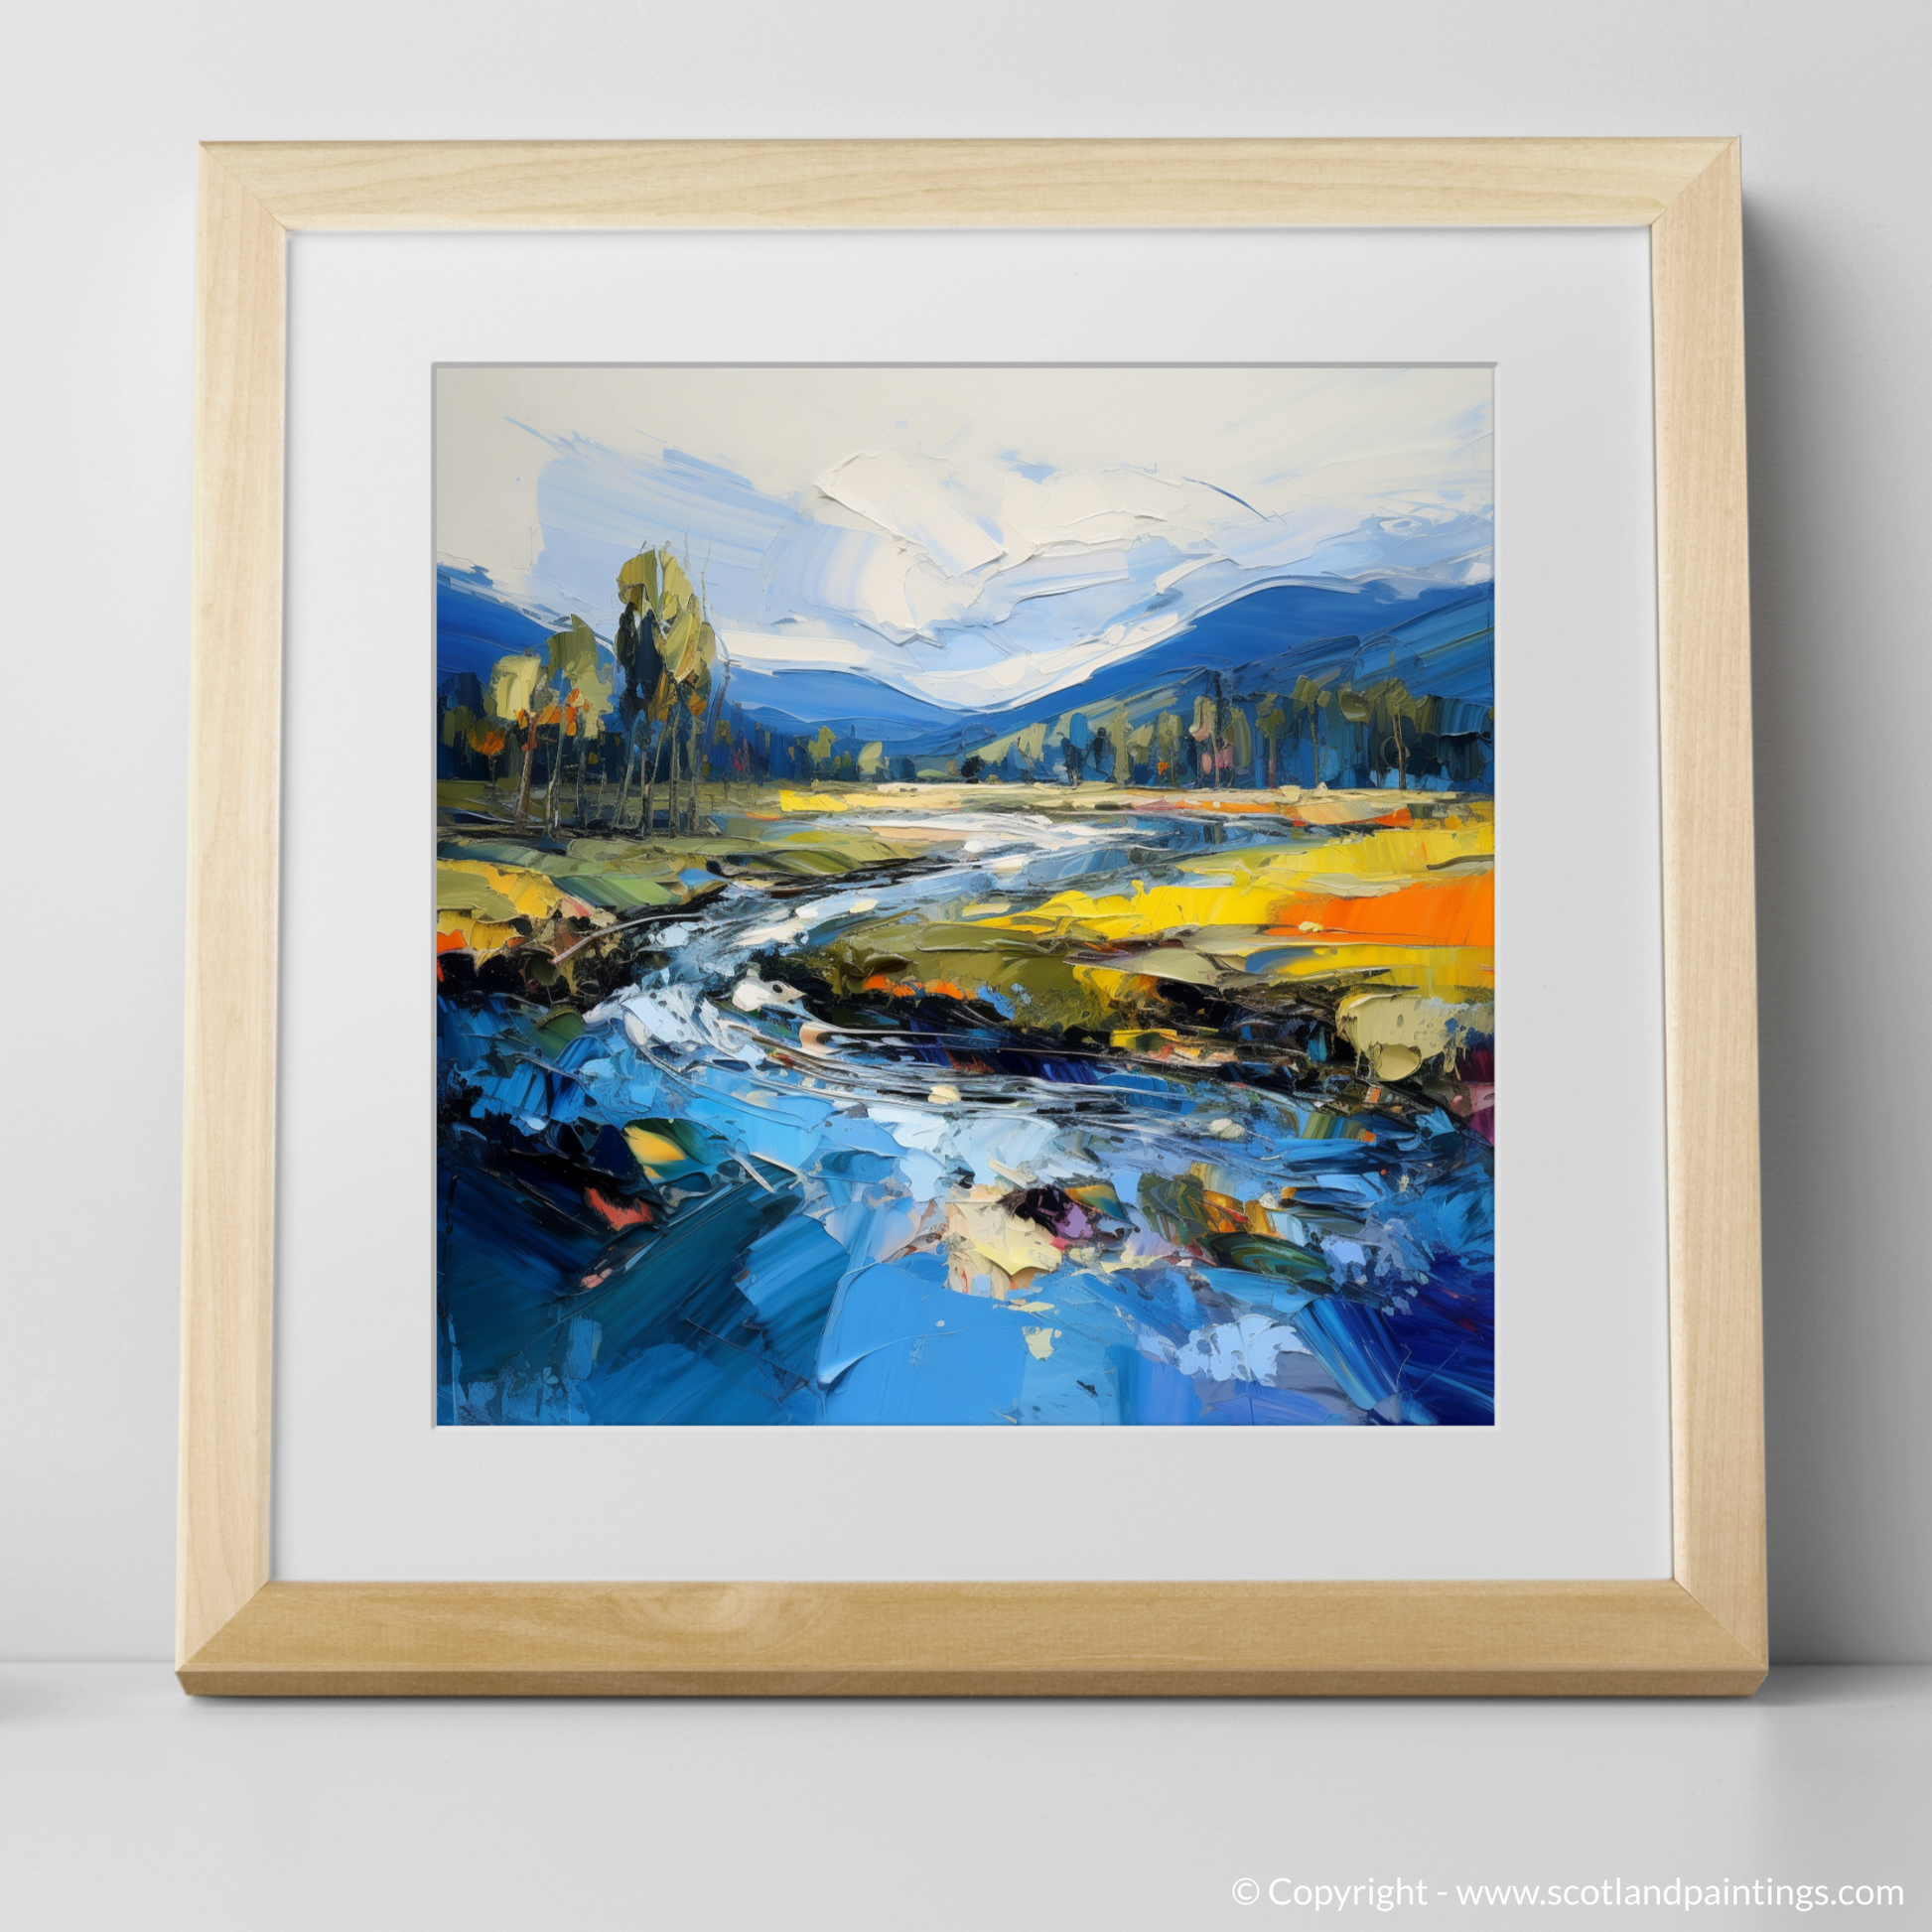 Art Print of River Spey, Highlands with a natural frame